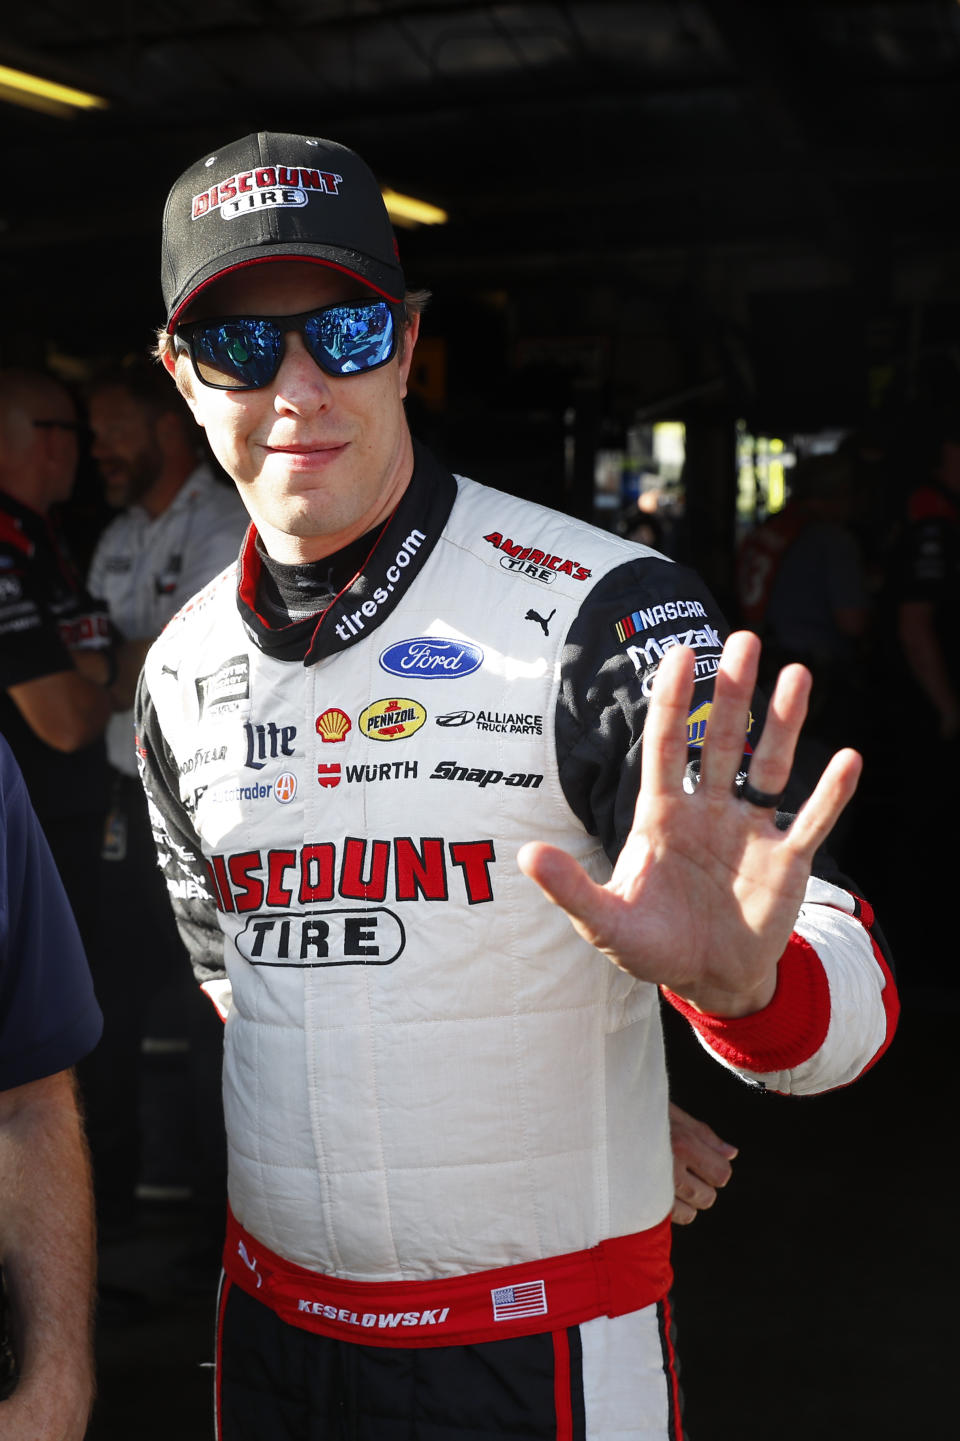 Brad Keselowski waves after winning the pole during qualifying for the NASCAR Cup Series auto race at Michigan International Speedway in Brooklyn, Mich., Friday, Aug. 9, 2019. (AP Photo/Paul Sancya)